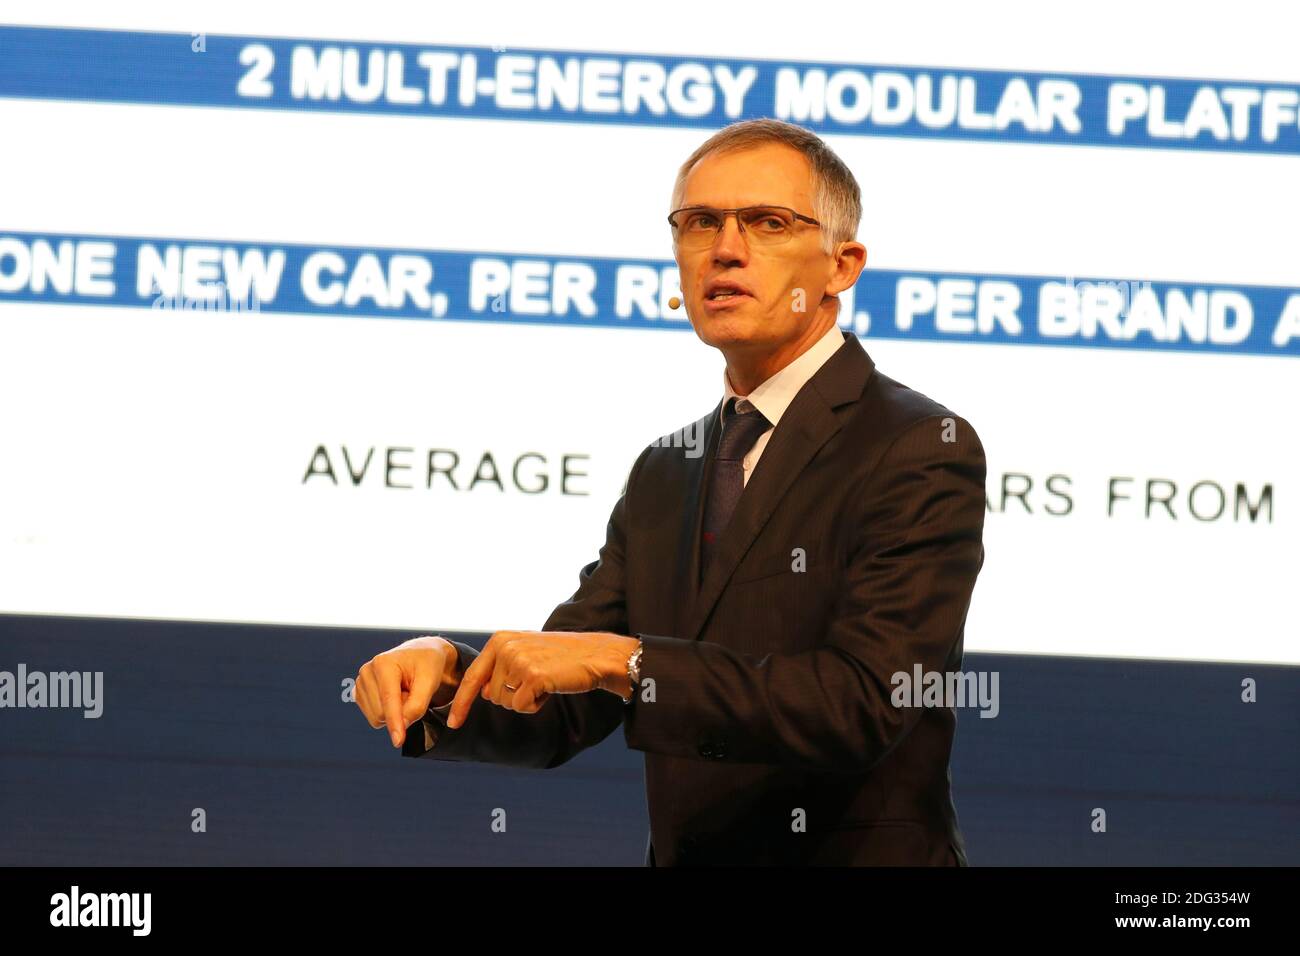 File photo - President of PSA Group Carlos Tavares during a Peugeot press conference in the Paris Motor Show 2016 in Palais des Expositions, Paris, France on September 29th, 2016. The French company that owns Peugeot and Citroen has struck a 2.2bn euro deal to buy General Motors' European unit, including Vauxhall. GM Europe has not made a profit since 1999 and the deal has raised fears about job losses at Vauxhall. With GM's Opel and Vauxhall operations, PSA Group would become the second largest carmaker in Europe, behind Volkswagen. Photo by Henri Szwarc/ABACAPRESS.COM Stock Photo